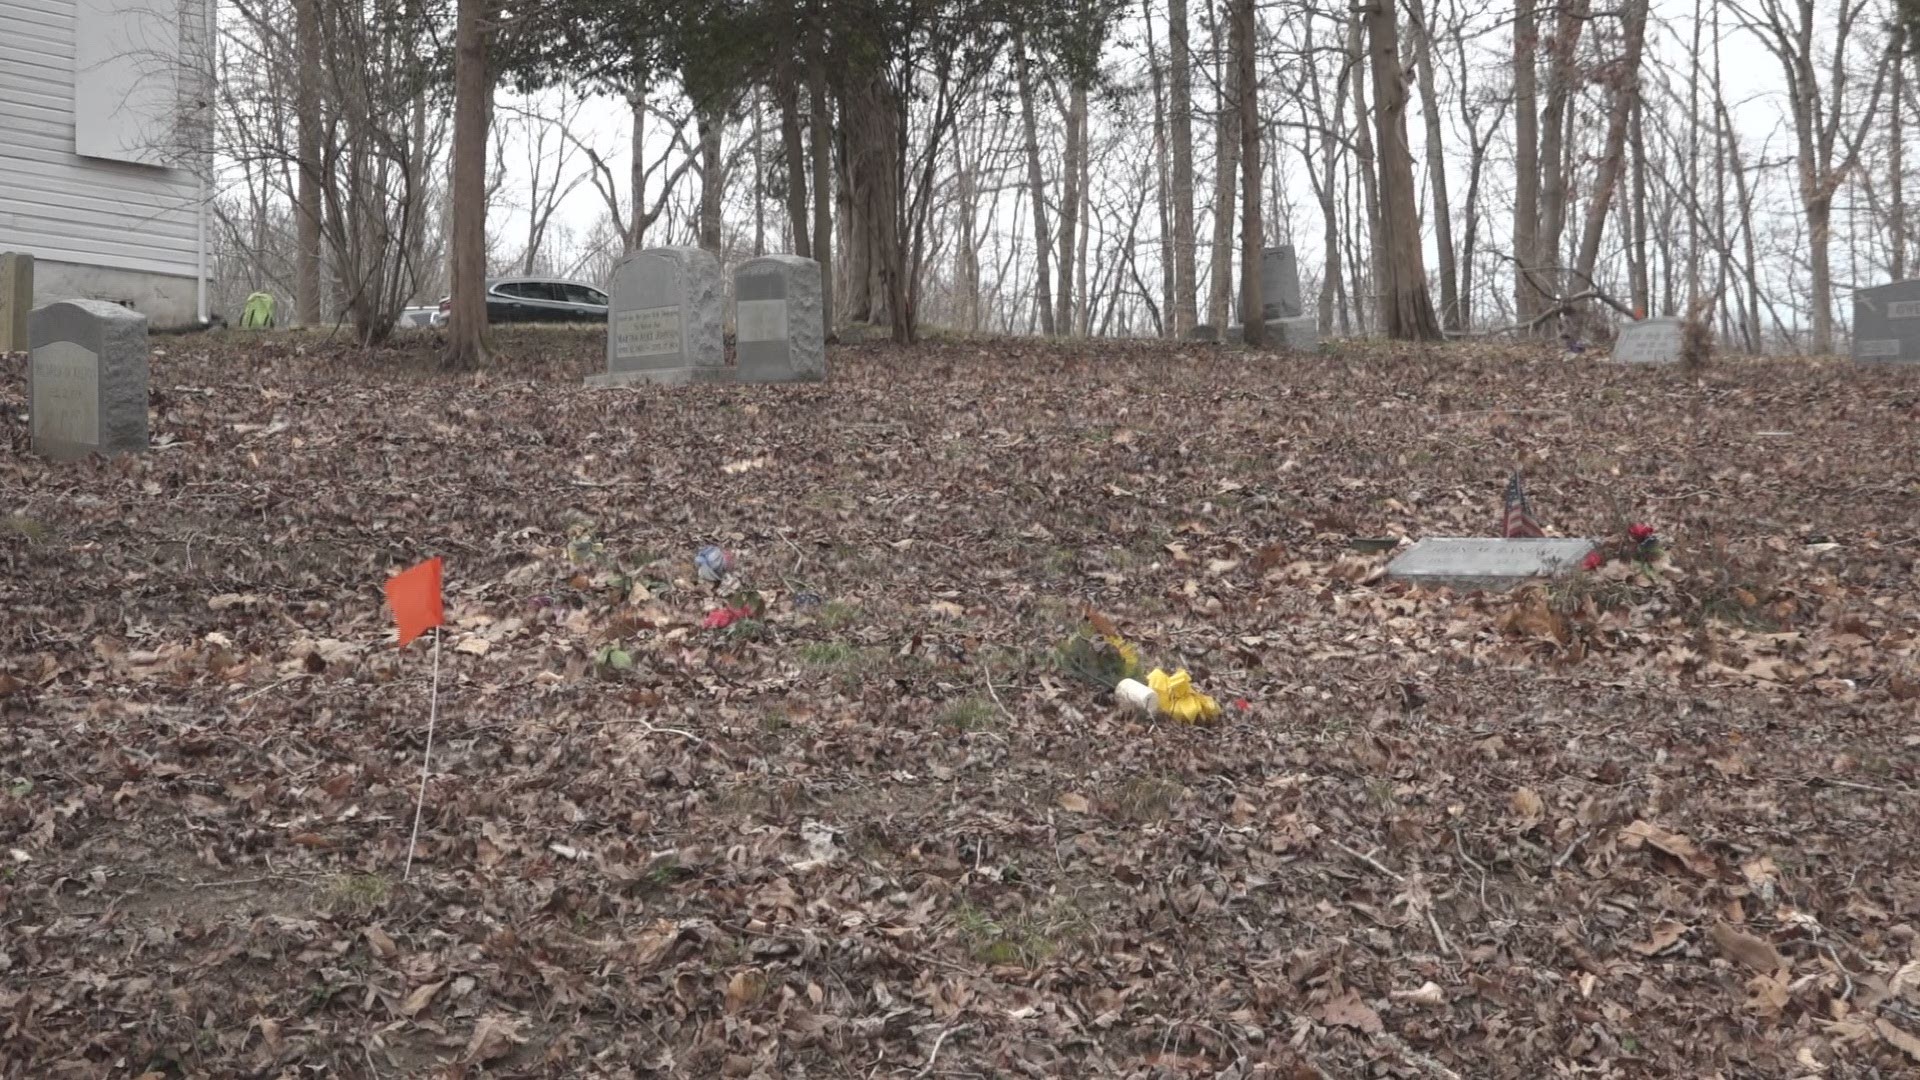 A historical society in Prince George's County is learning how to locate remains in the burial grounds at Mount Nebo AME church.